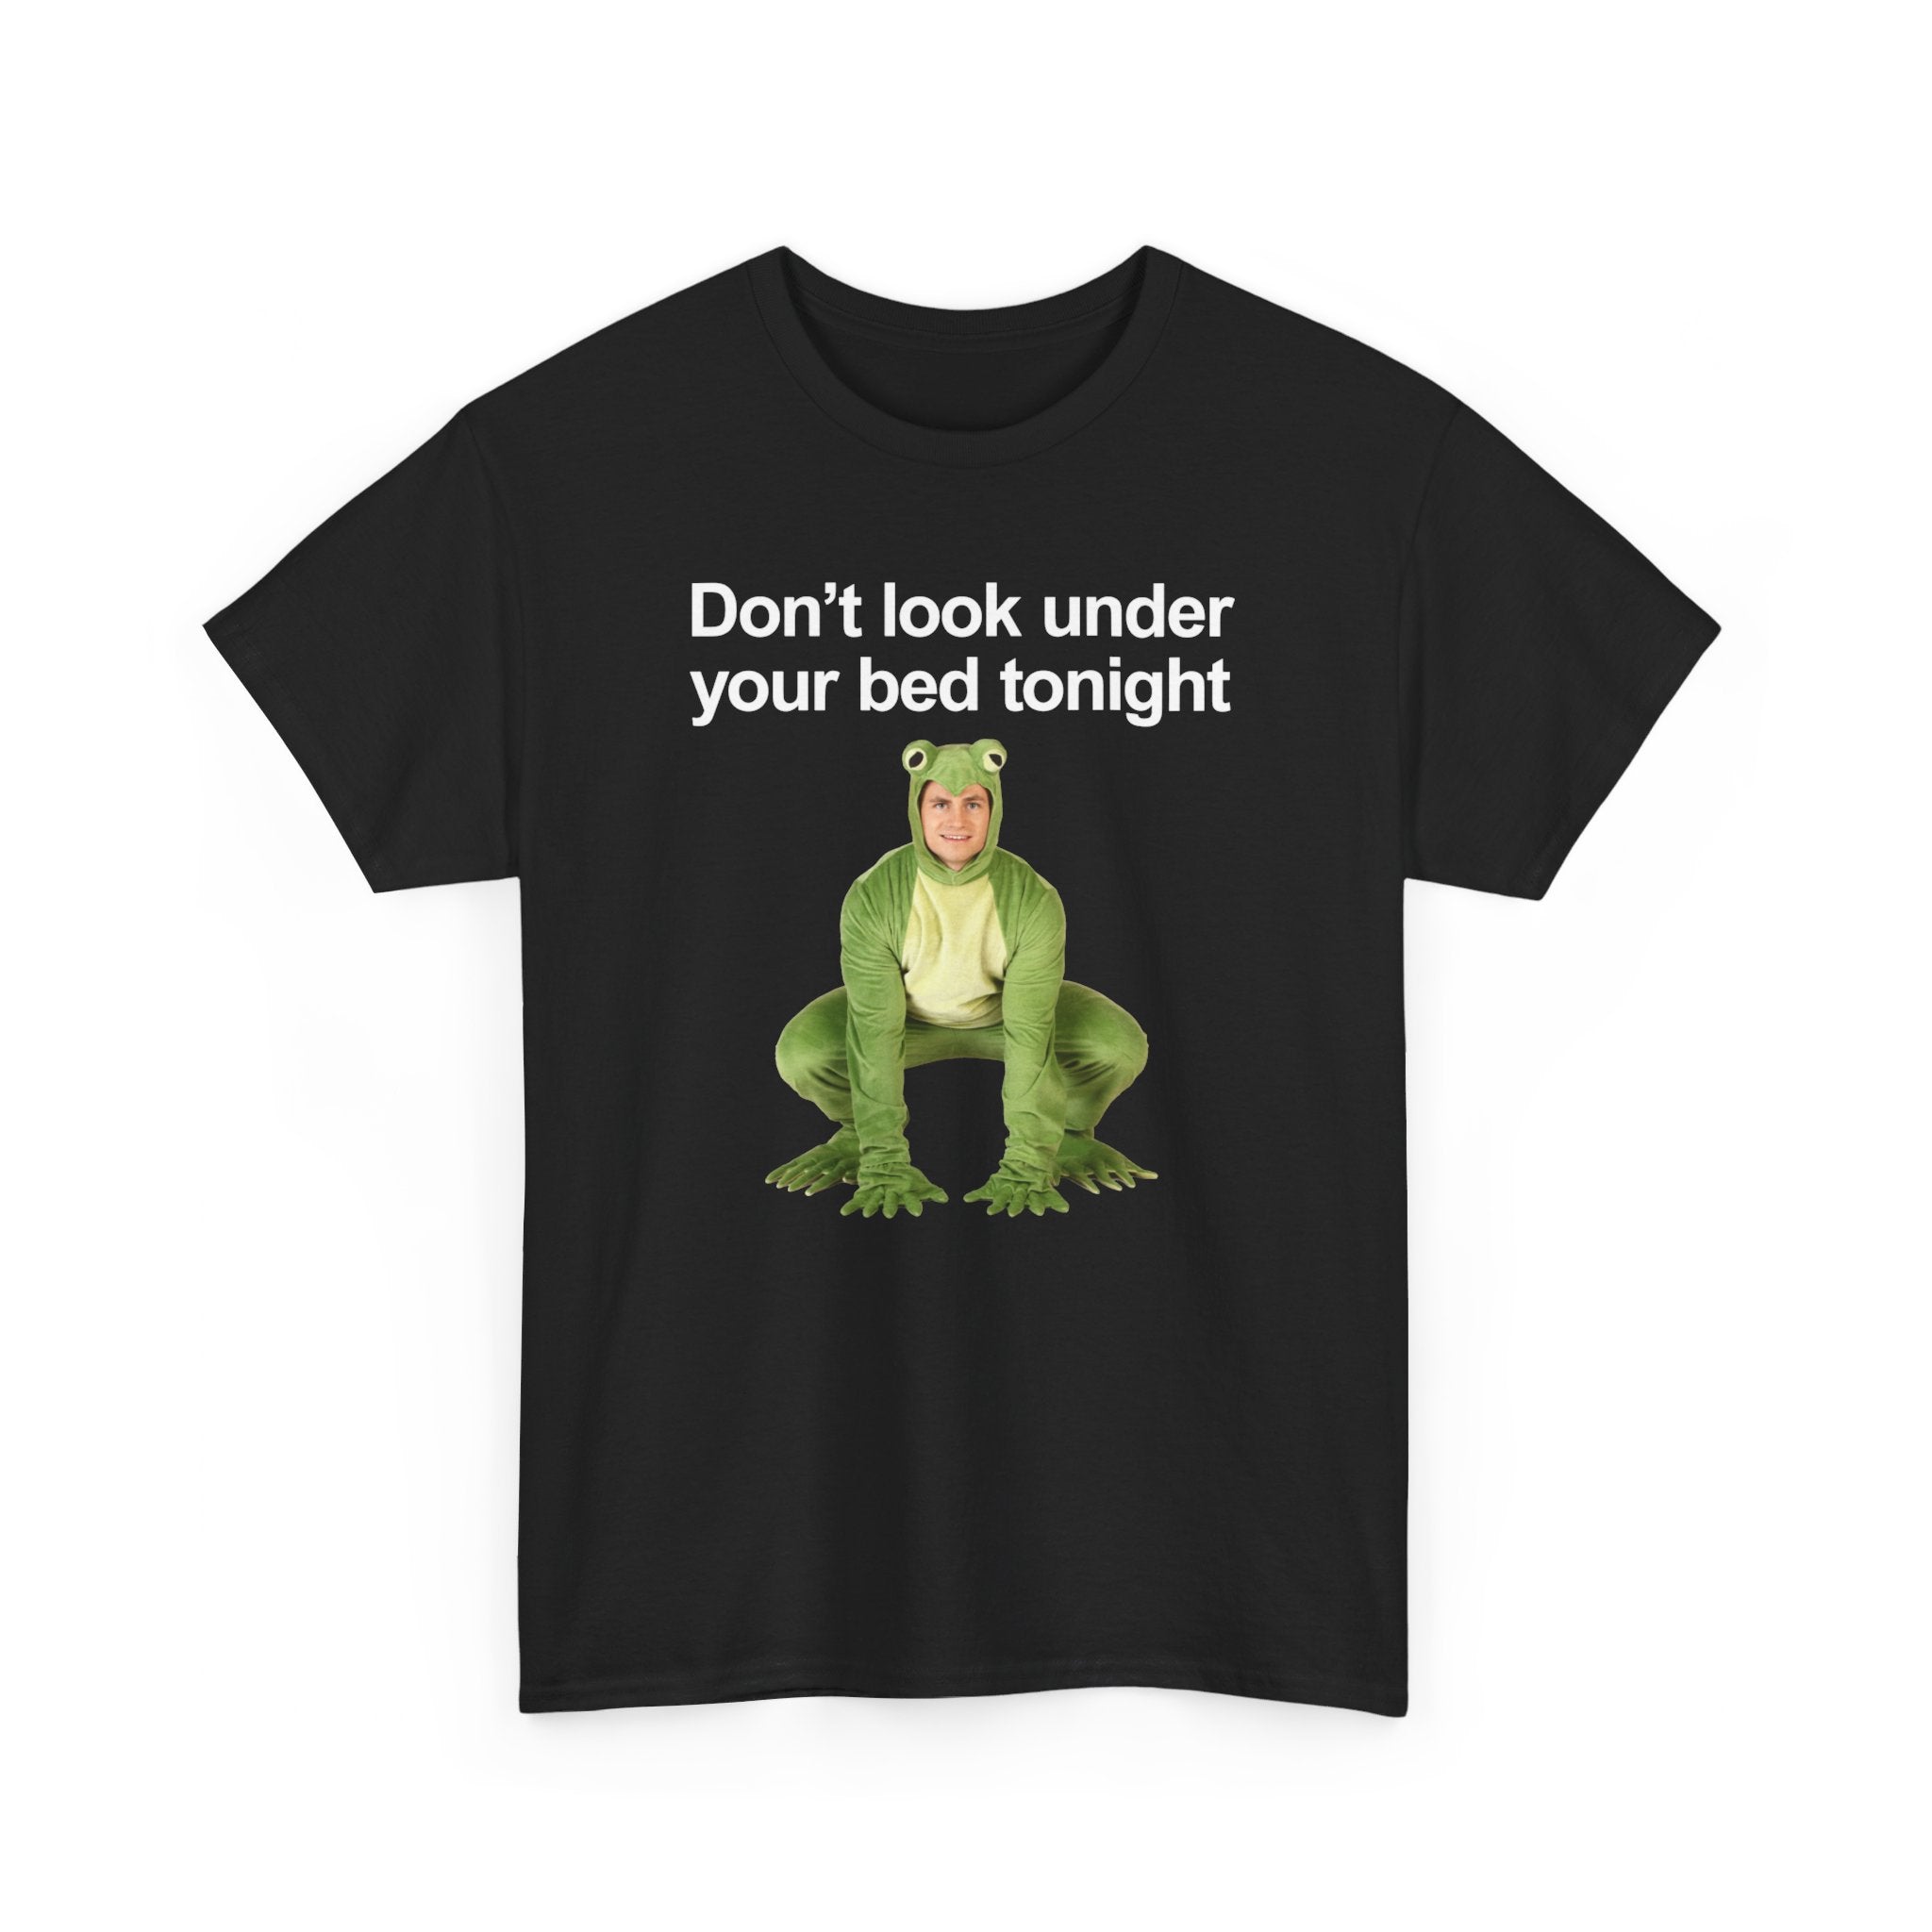 DON'T LOOK UNDER YOUR BED TONIGHT T-SHIRT